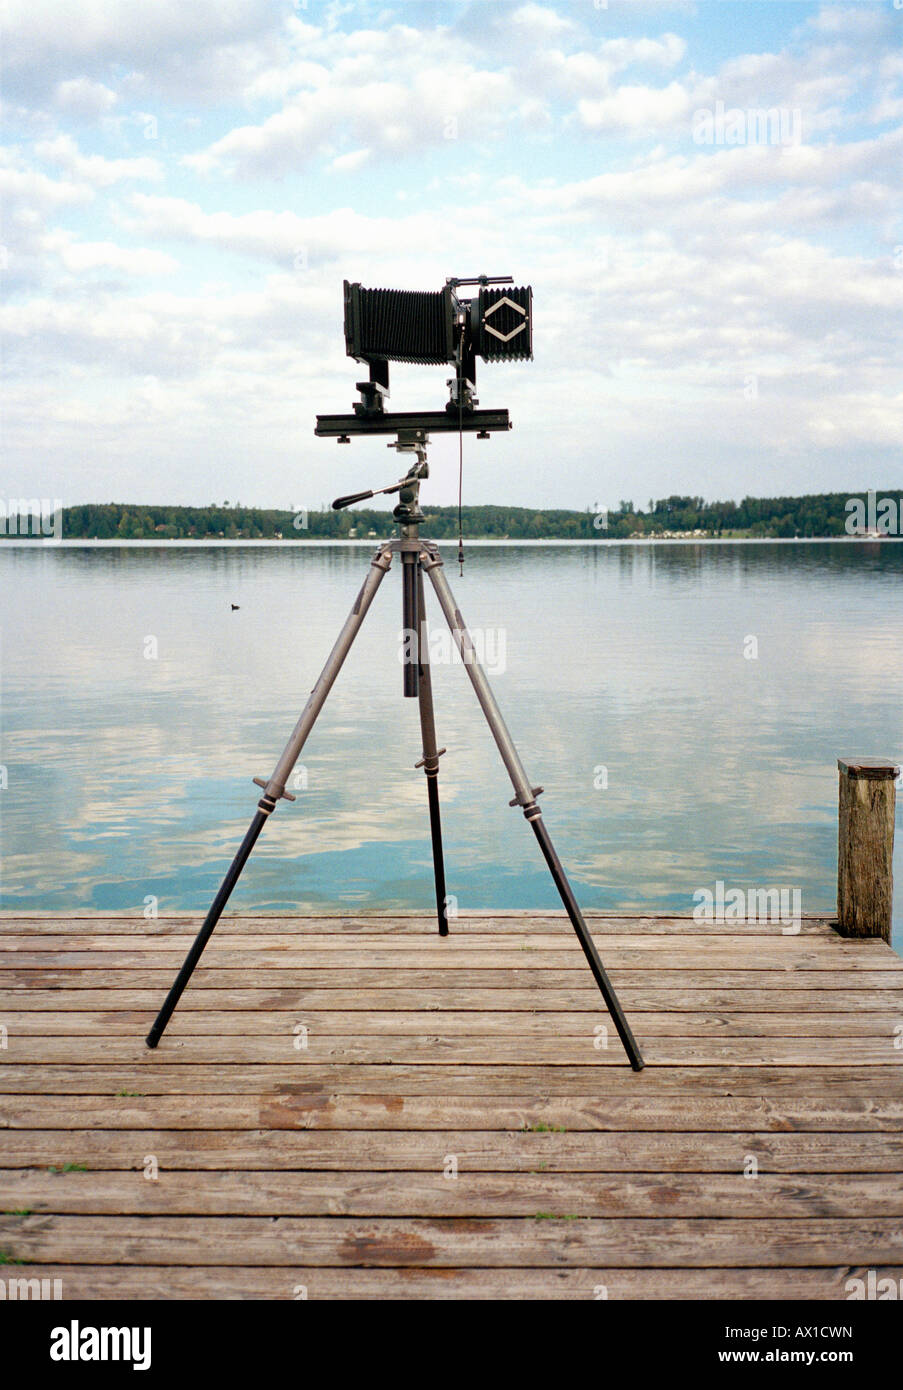 An old fashioned camera on a tripod in front of a lake Stock Photo